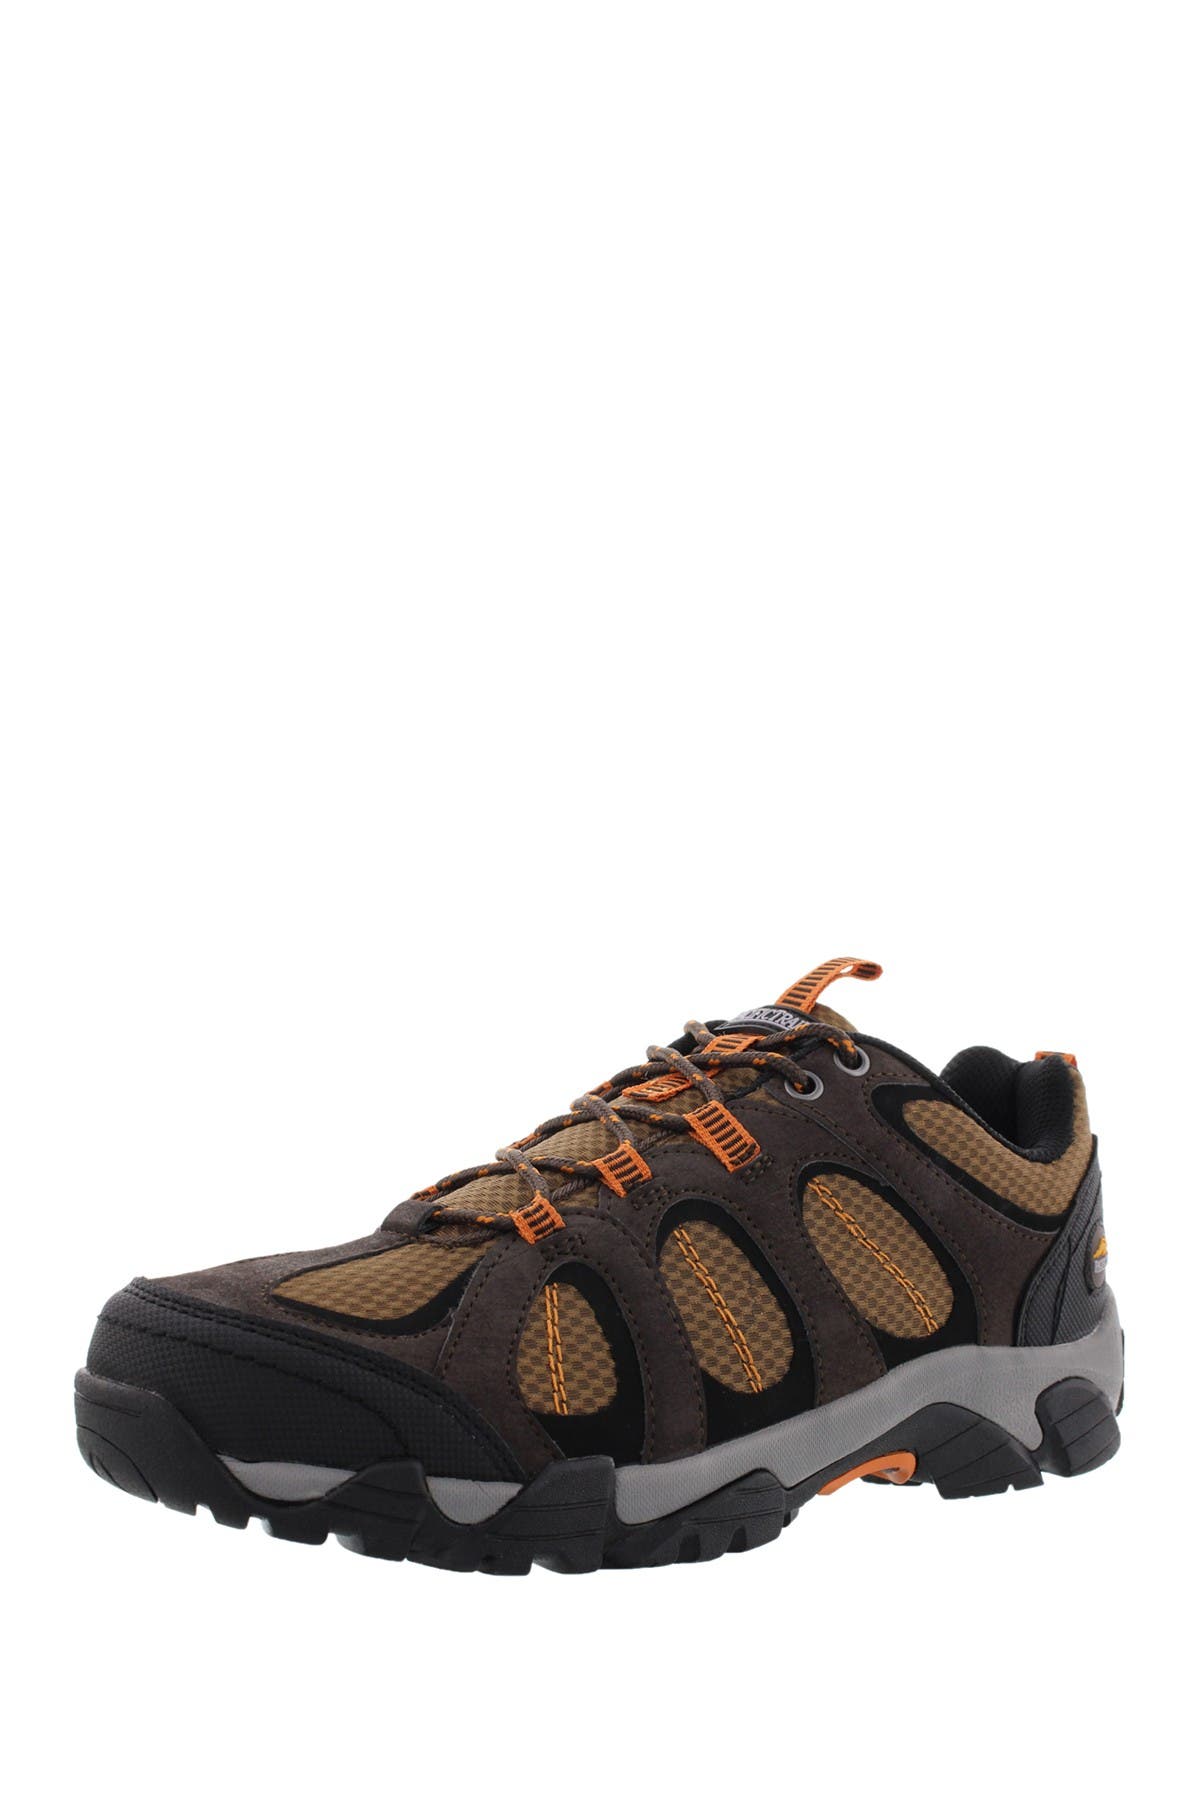 pacific trail shoes